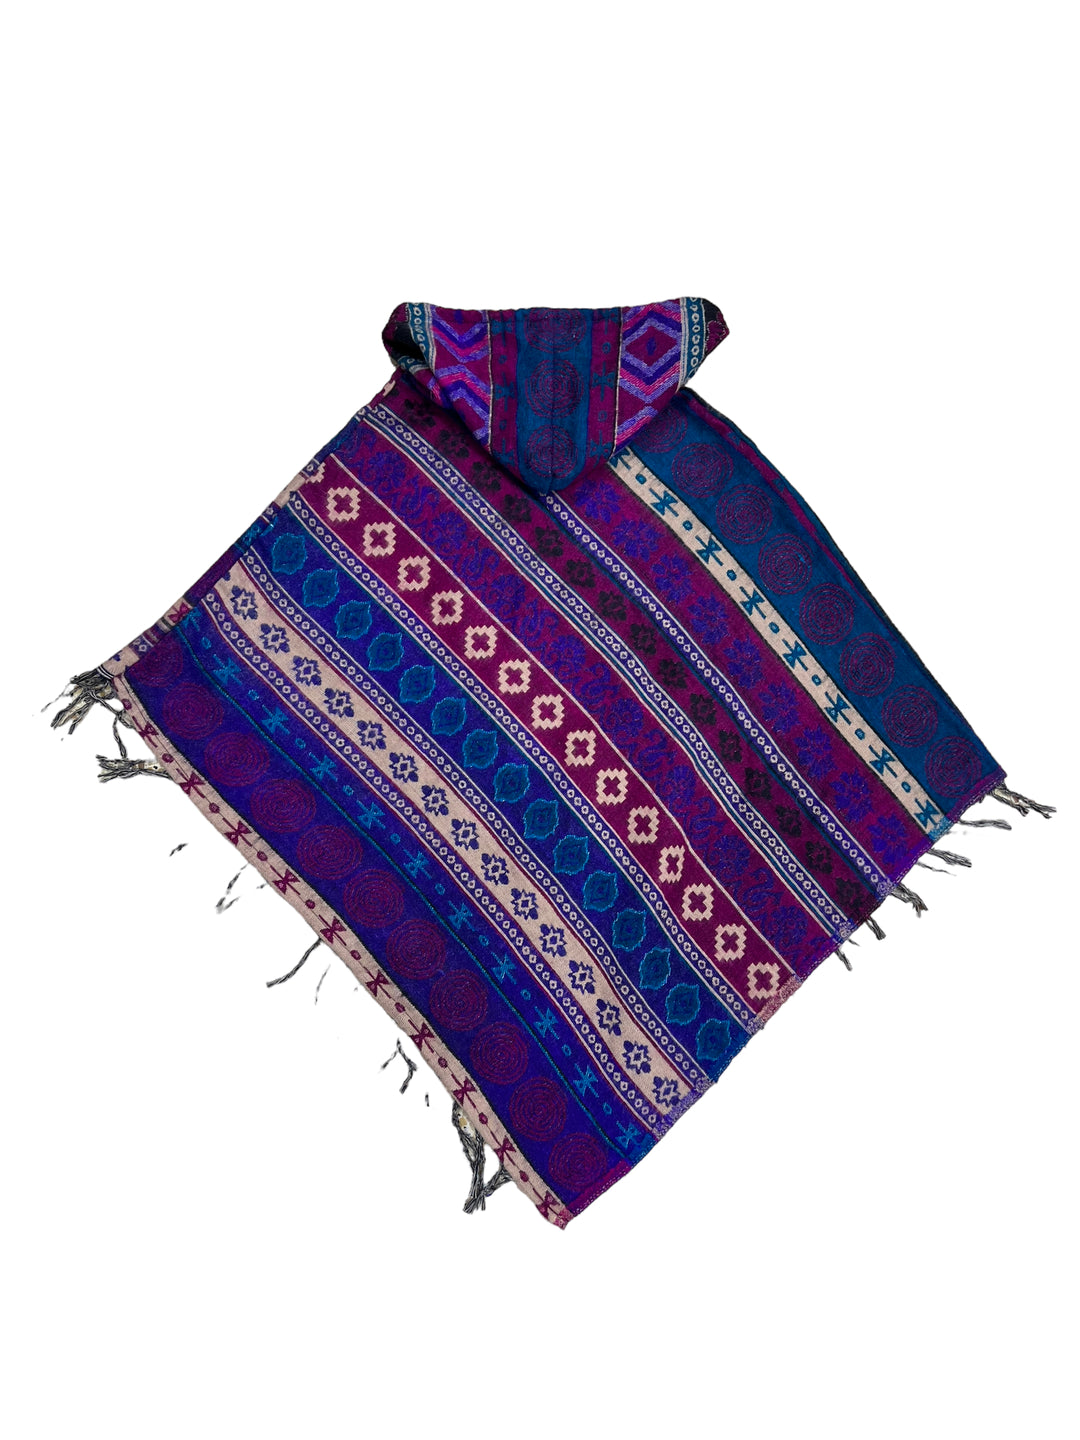 Onesize hooded Poncho made in India